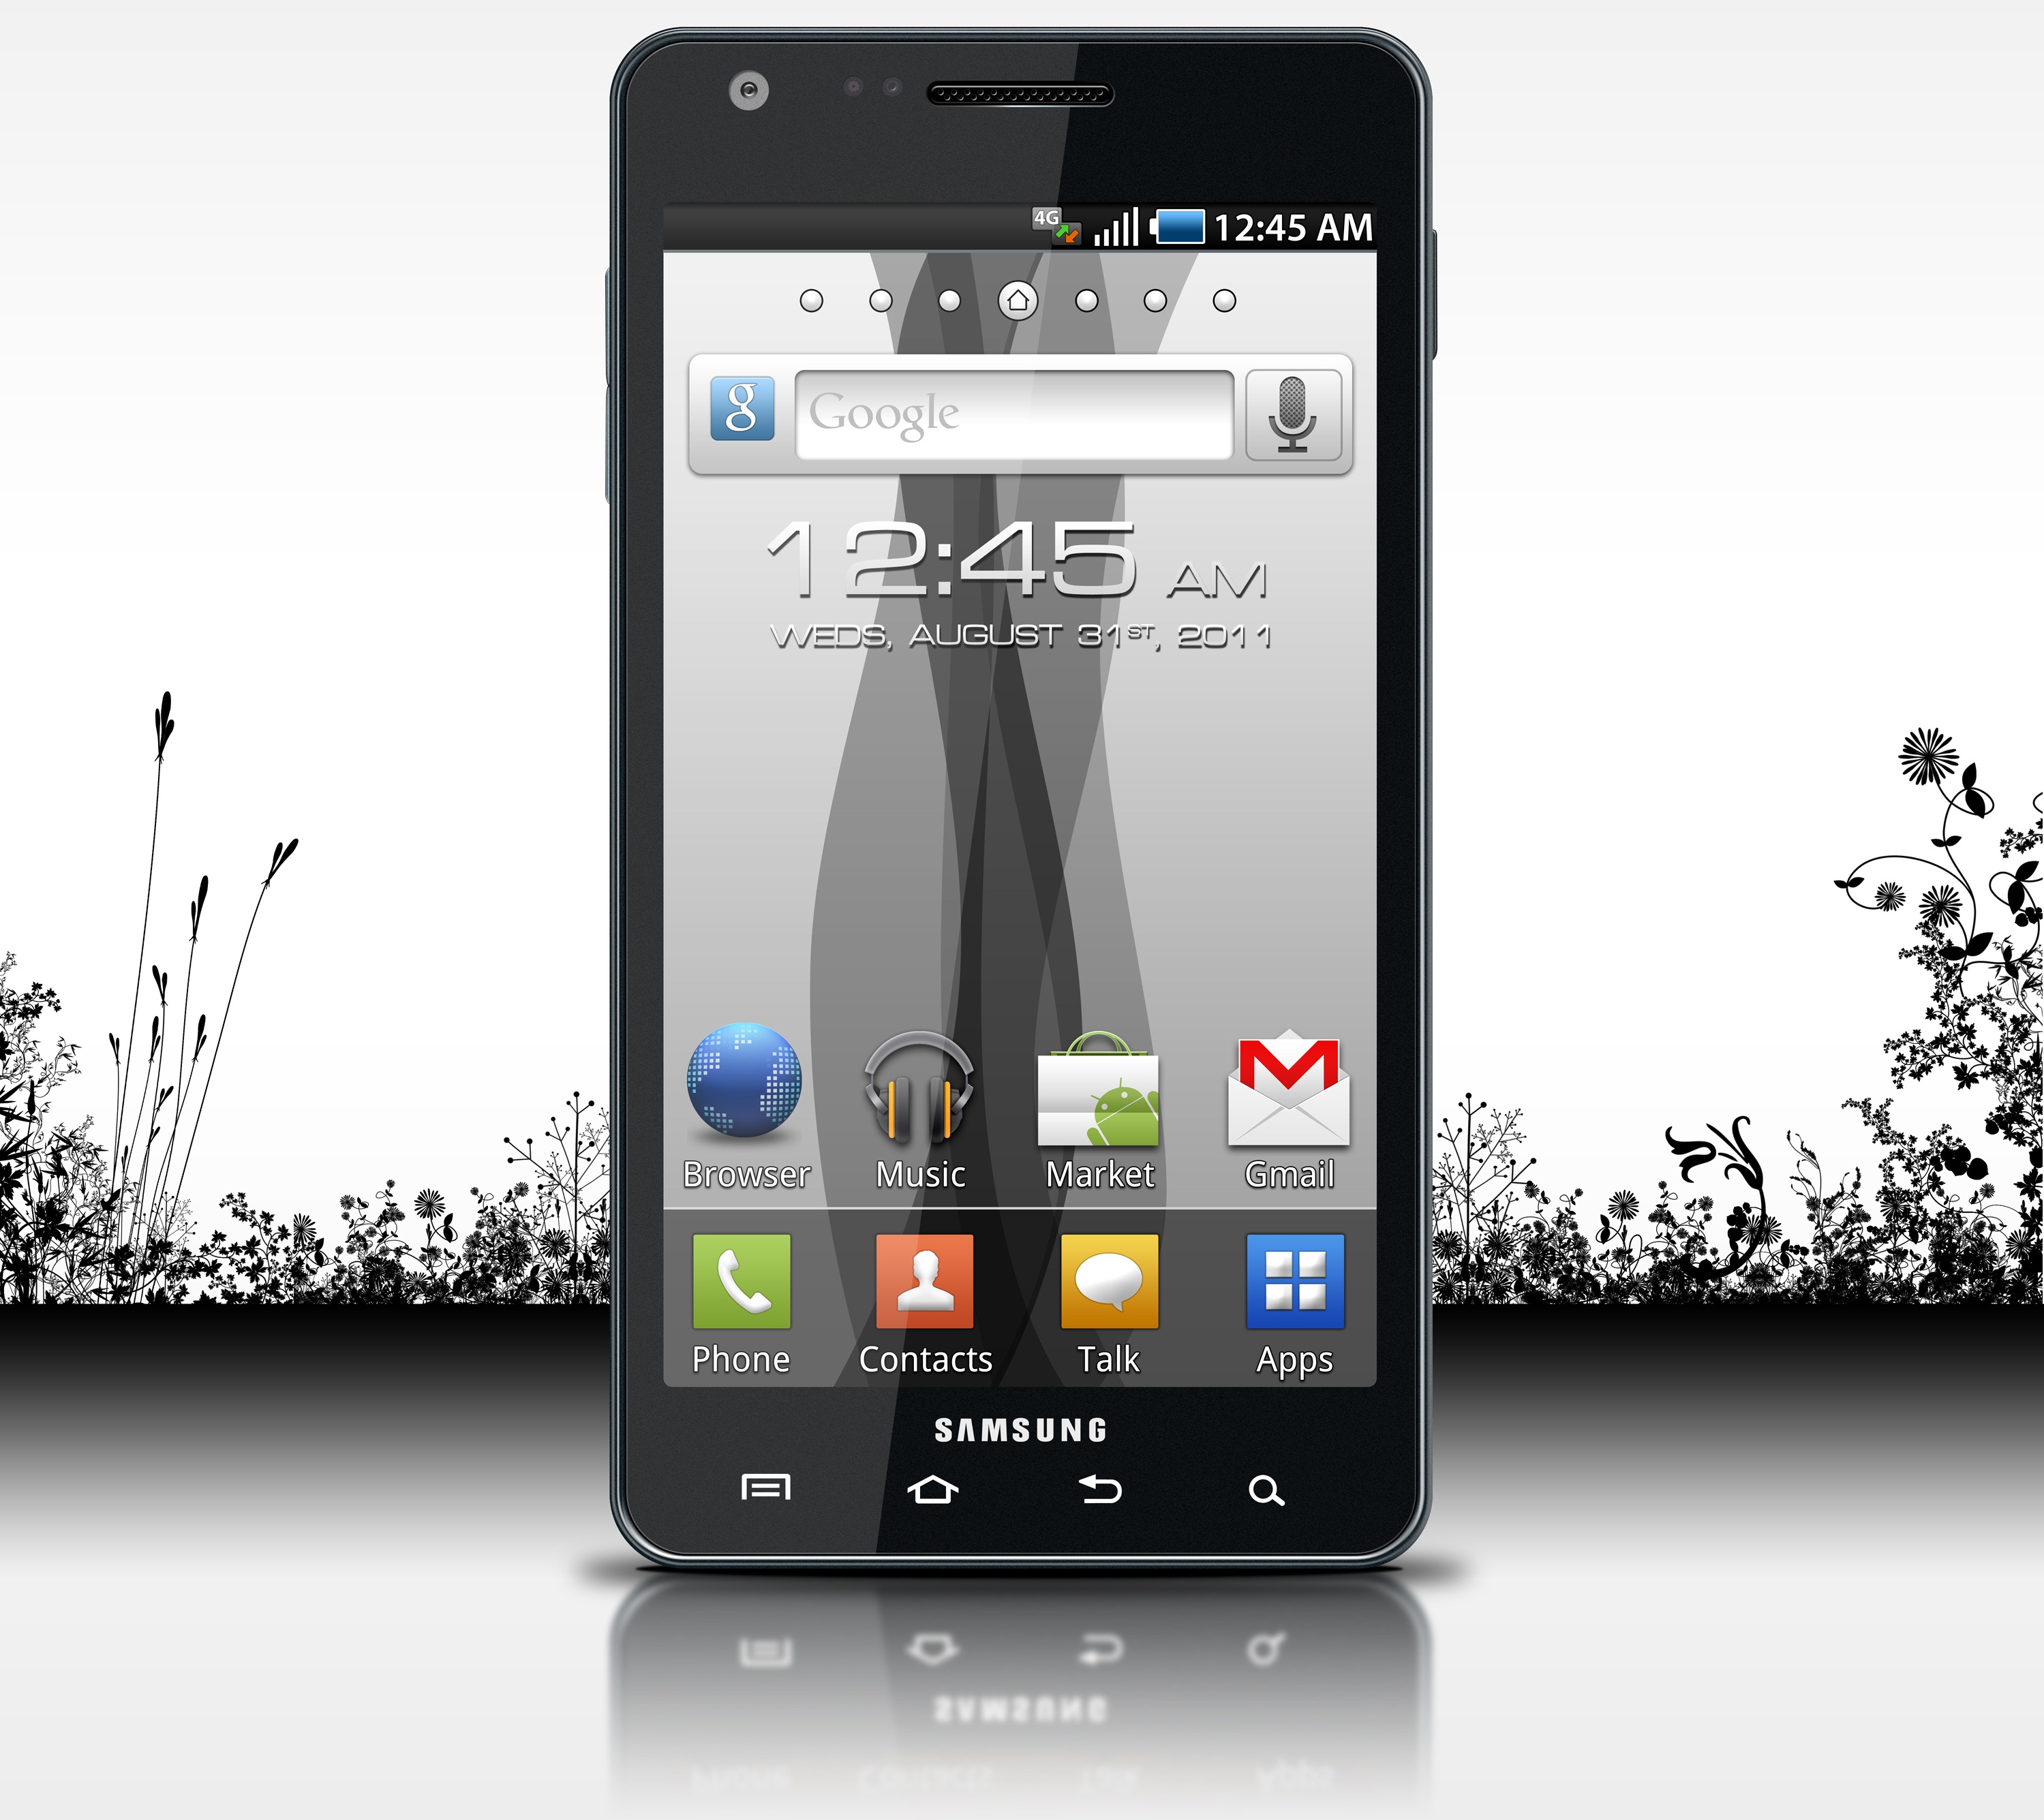 Samsung Infuse 4G Receives Android 2.3.6